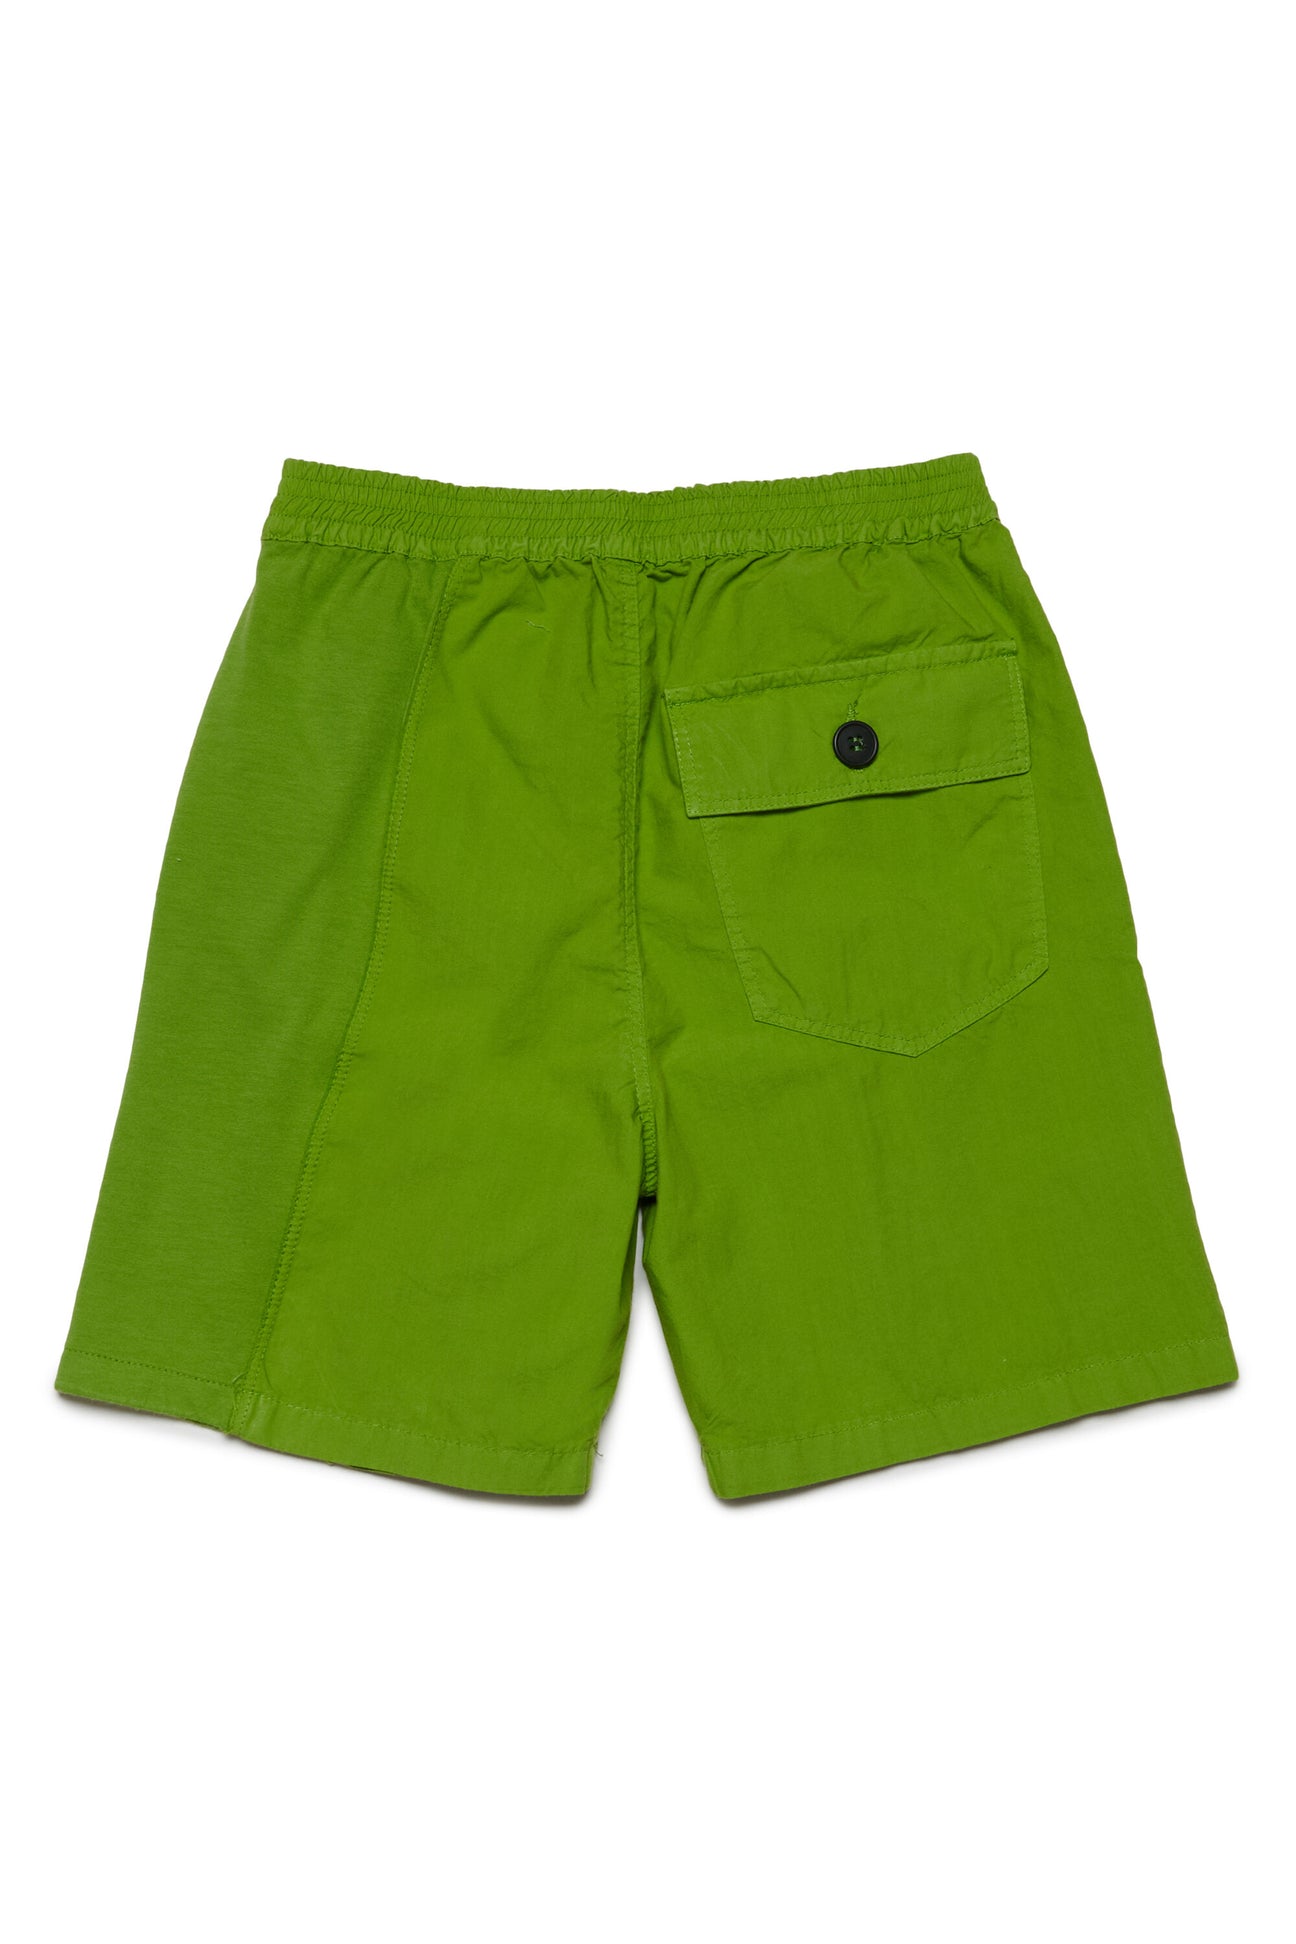 Deadstock fabric shorts with MYAR logo Deadstock fabric shorts with MYAR logo